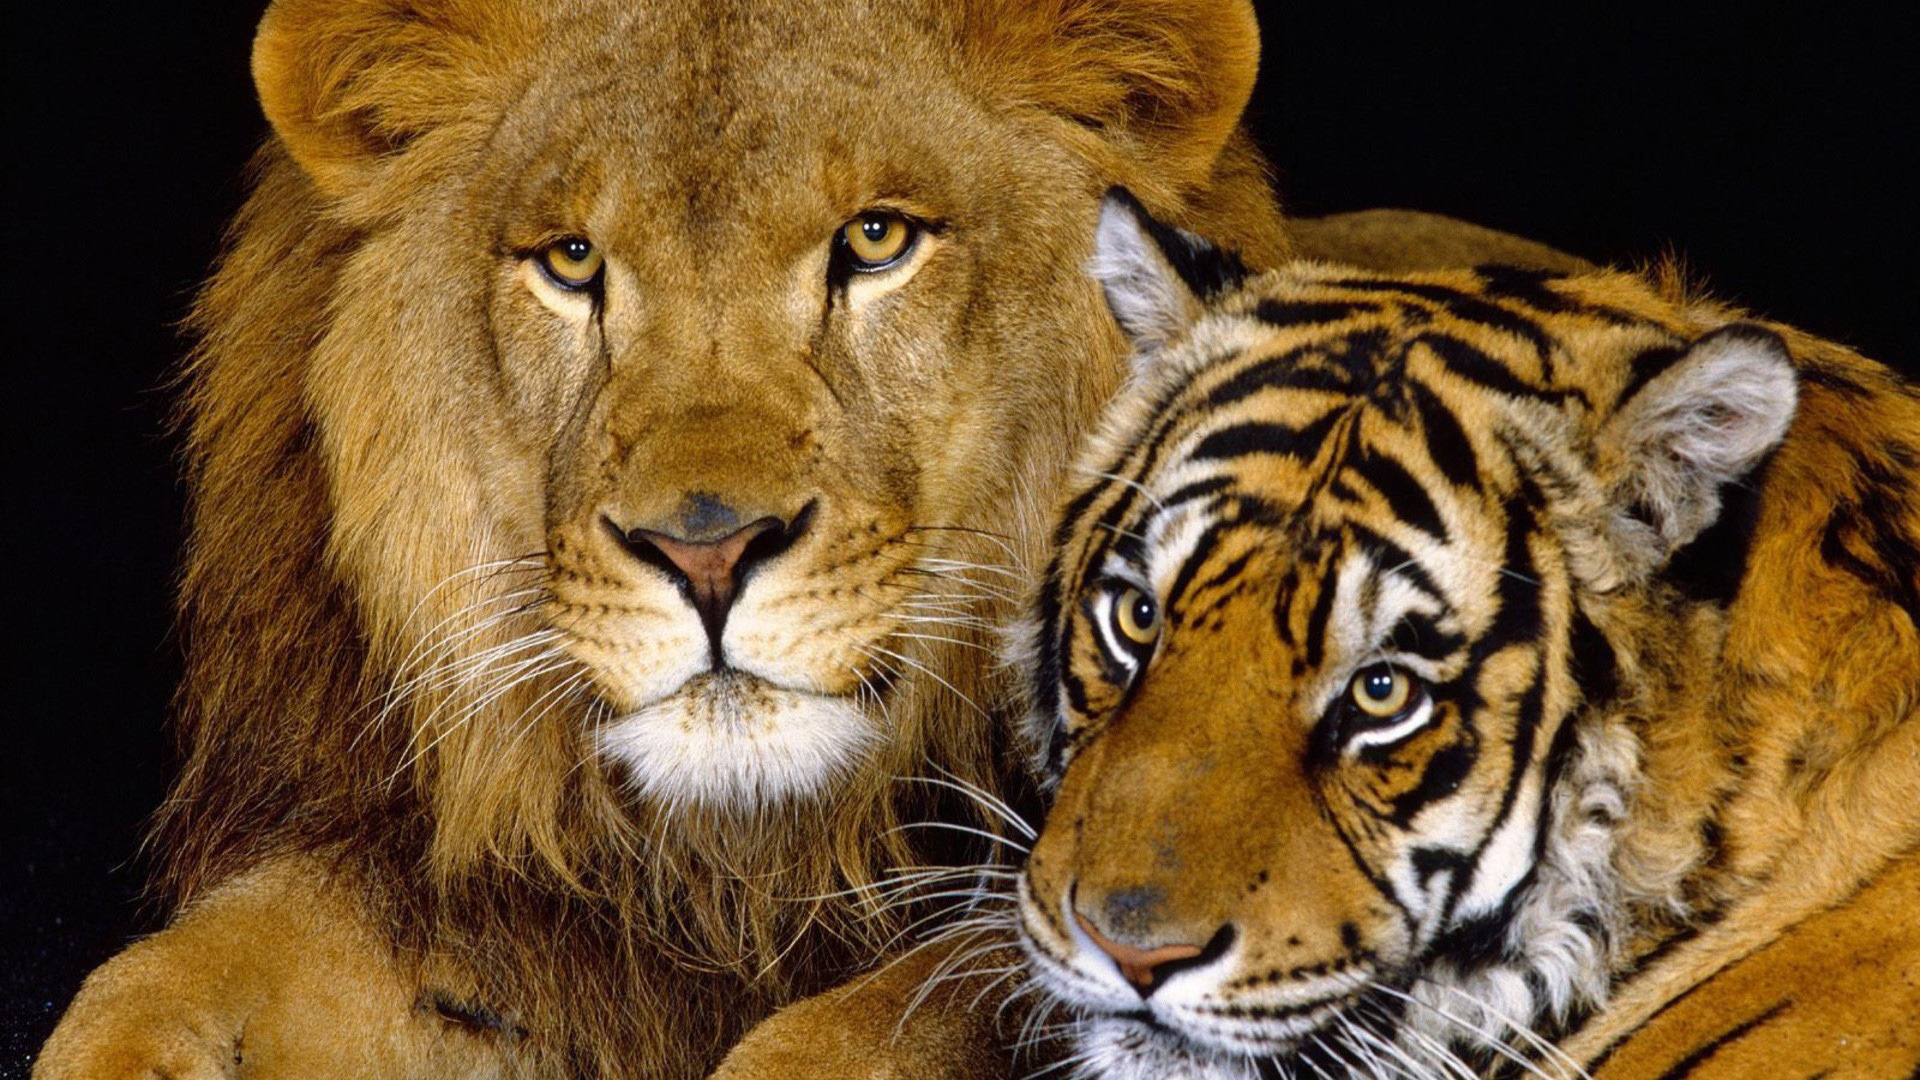 Tiger and Lion for 1920 x 1080 HDTV 1080p resolution